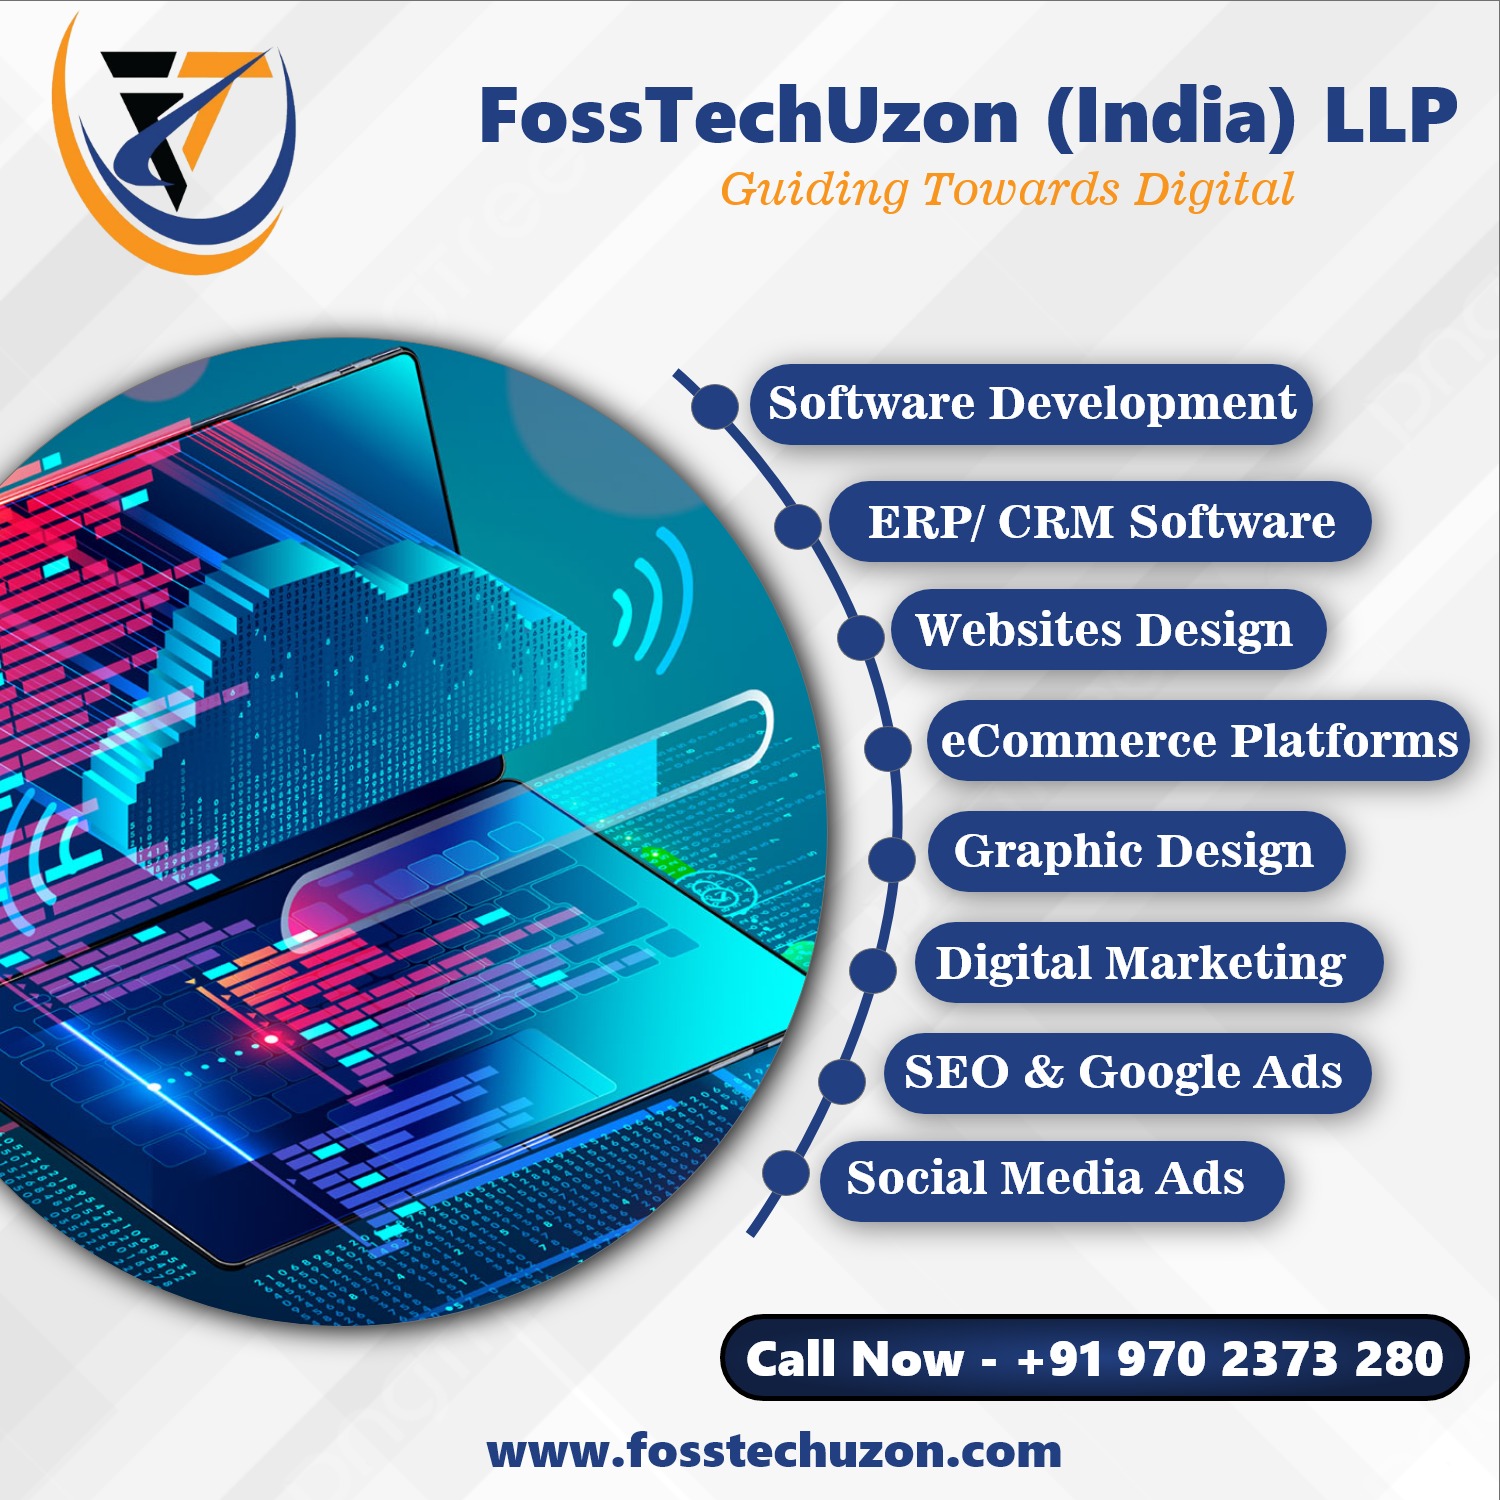 All-in-One Business Solution At FossTechUzon